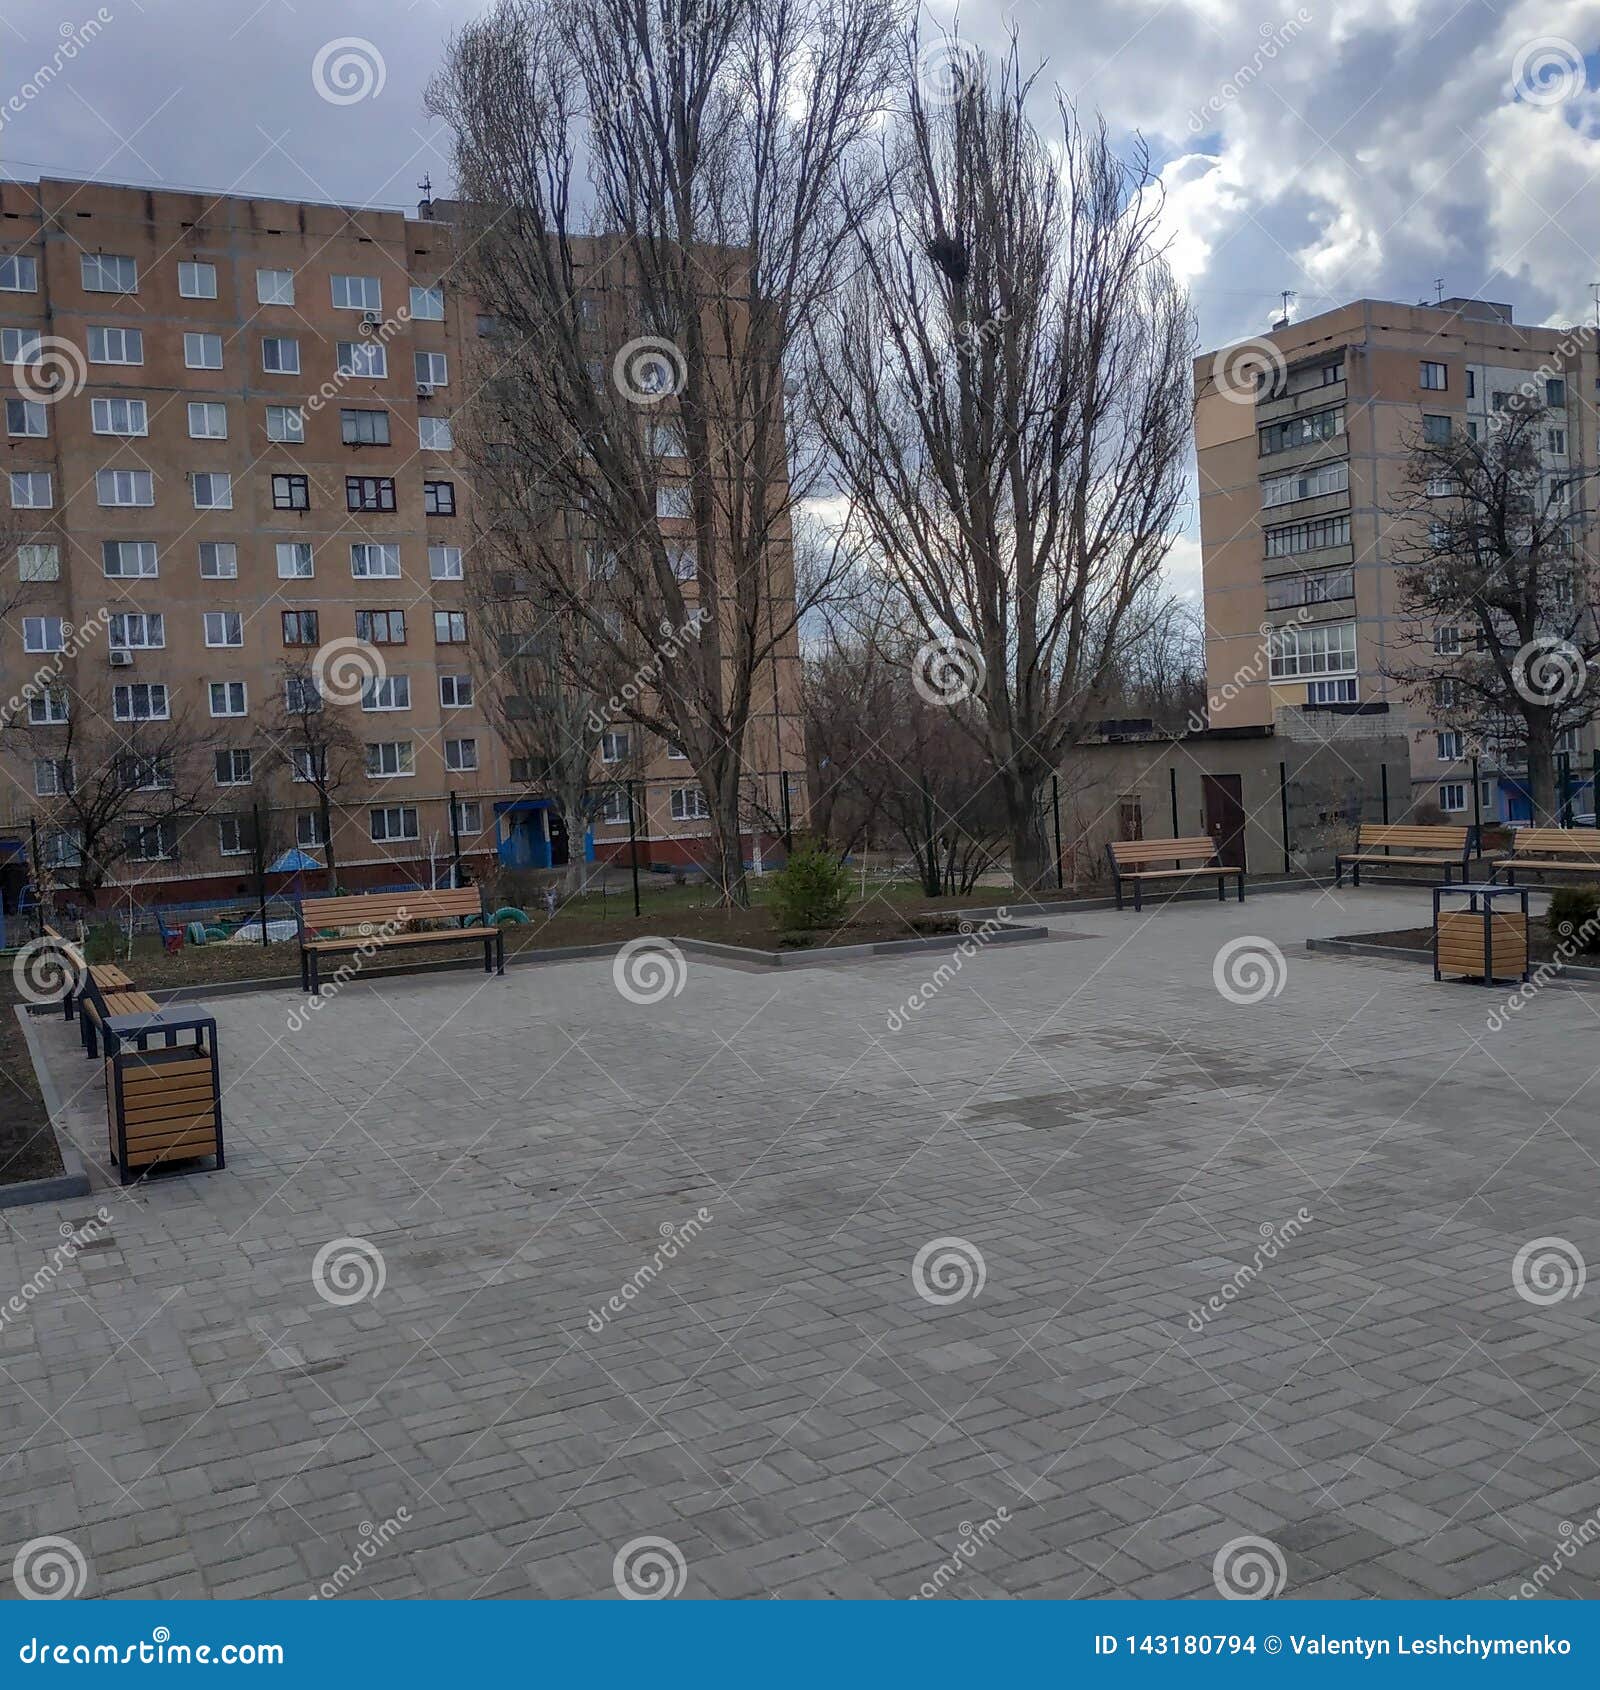 on the territory of the ukrainian gymnasium in kramatorsk in the middle of a residential neighborhood